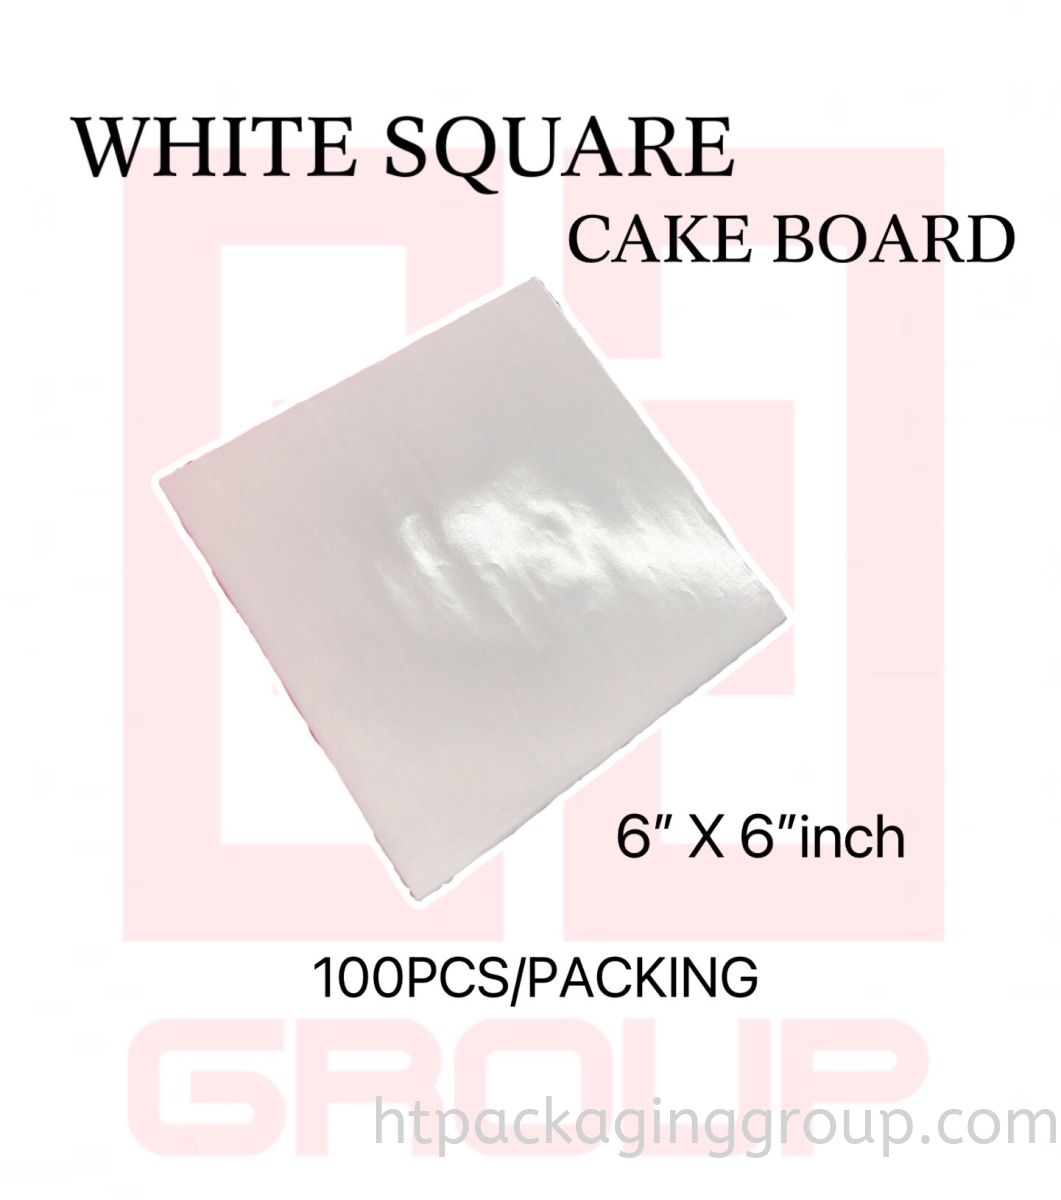 6inch X 6inch £¨100PCS/PACKING£© WHITE SQUARE CAKE BOARD  CAKE BOARD READY MADE Malaysia, Perak Supplier, Manufacturer, Supply, Supplies | HT Packaging Group (M) Sdn Bhd